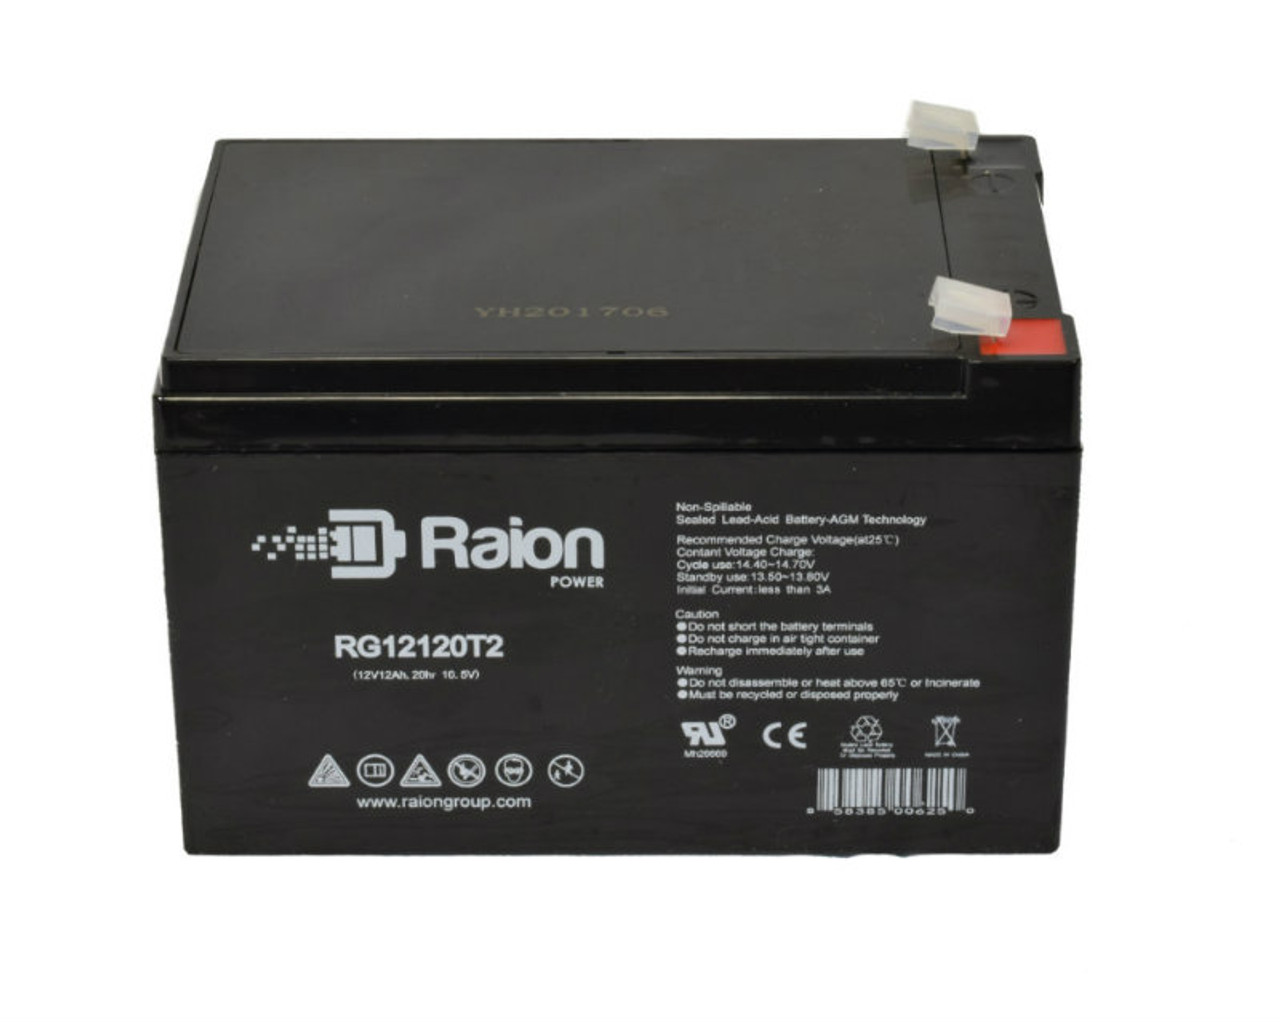 4 Pack 6-DZM-12 12V 12Ah SLA Battery for MotoTec Electric Scooters